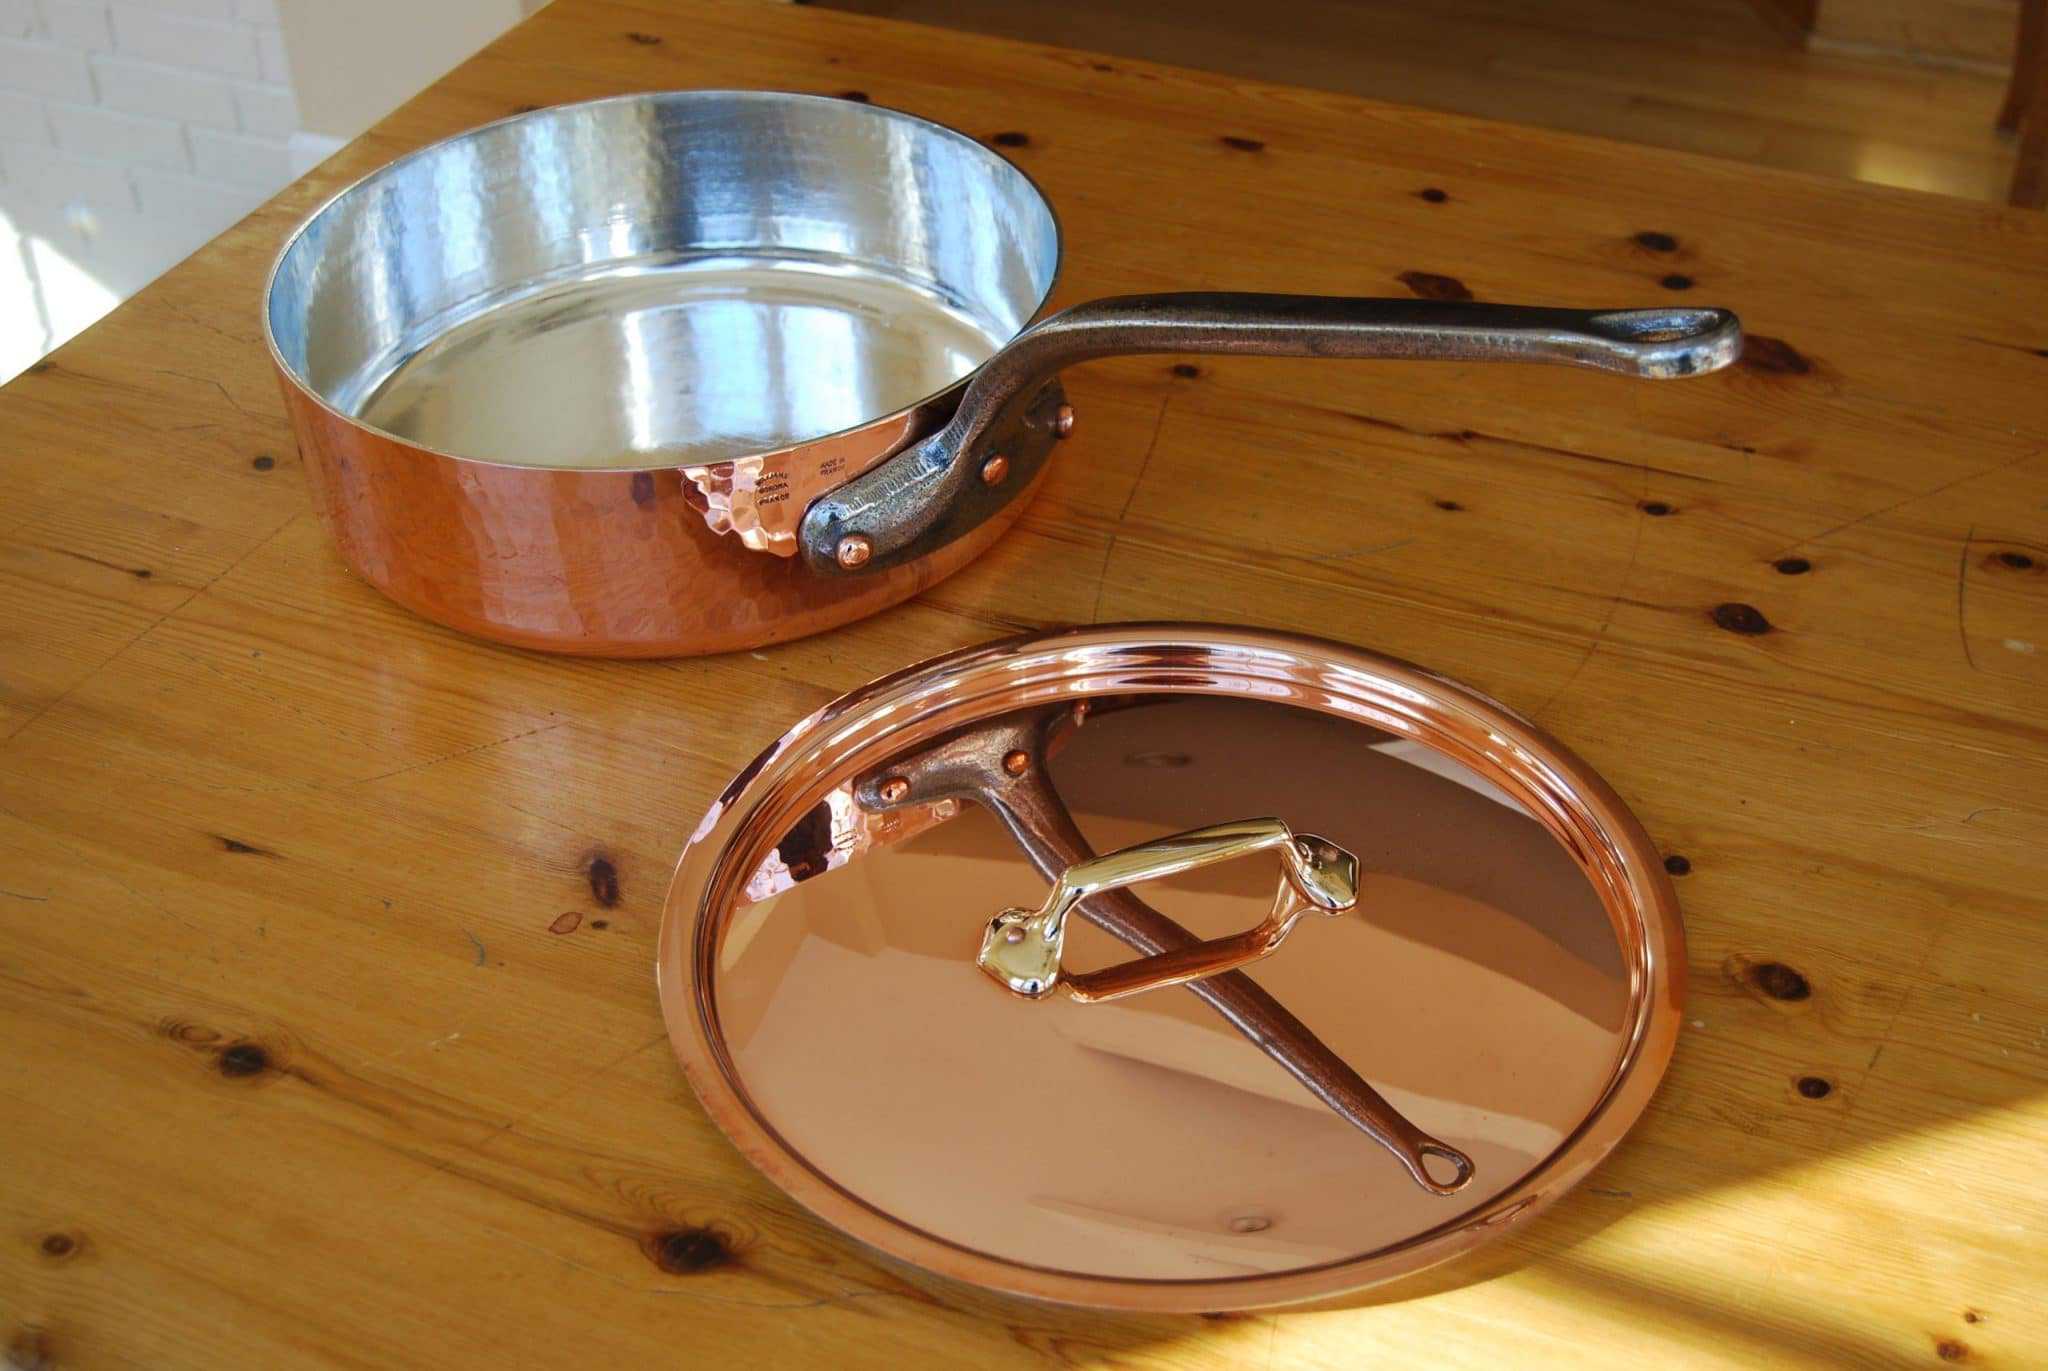 Copper Pans are Incredible for Sensitive Cooking